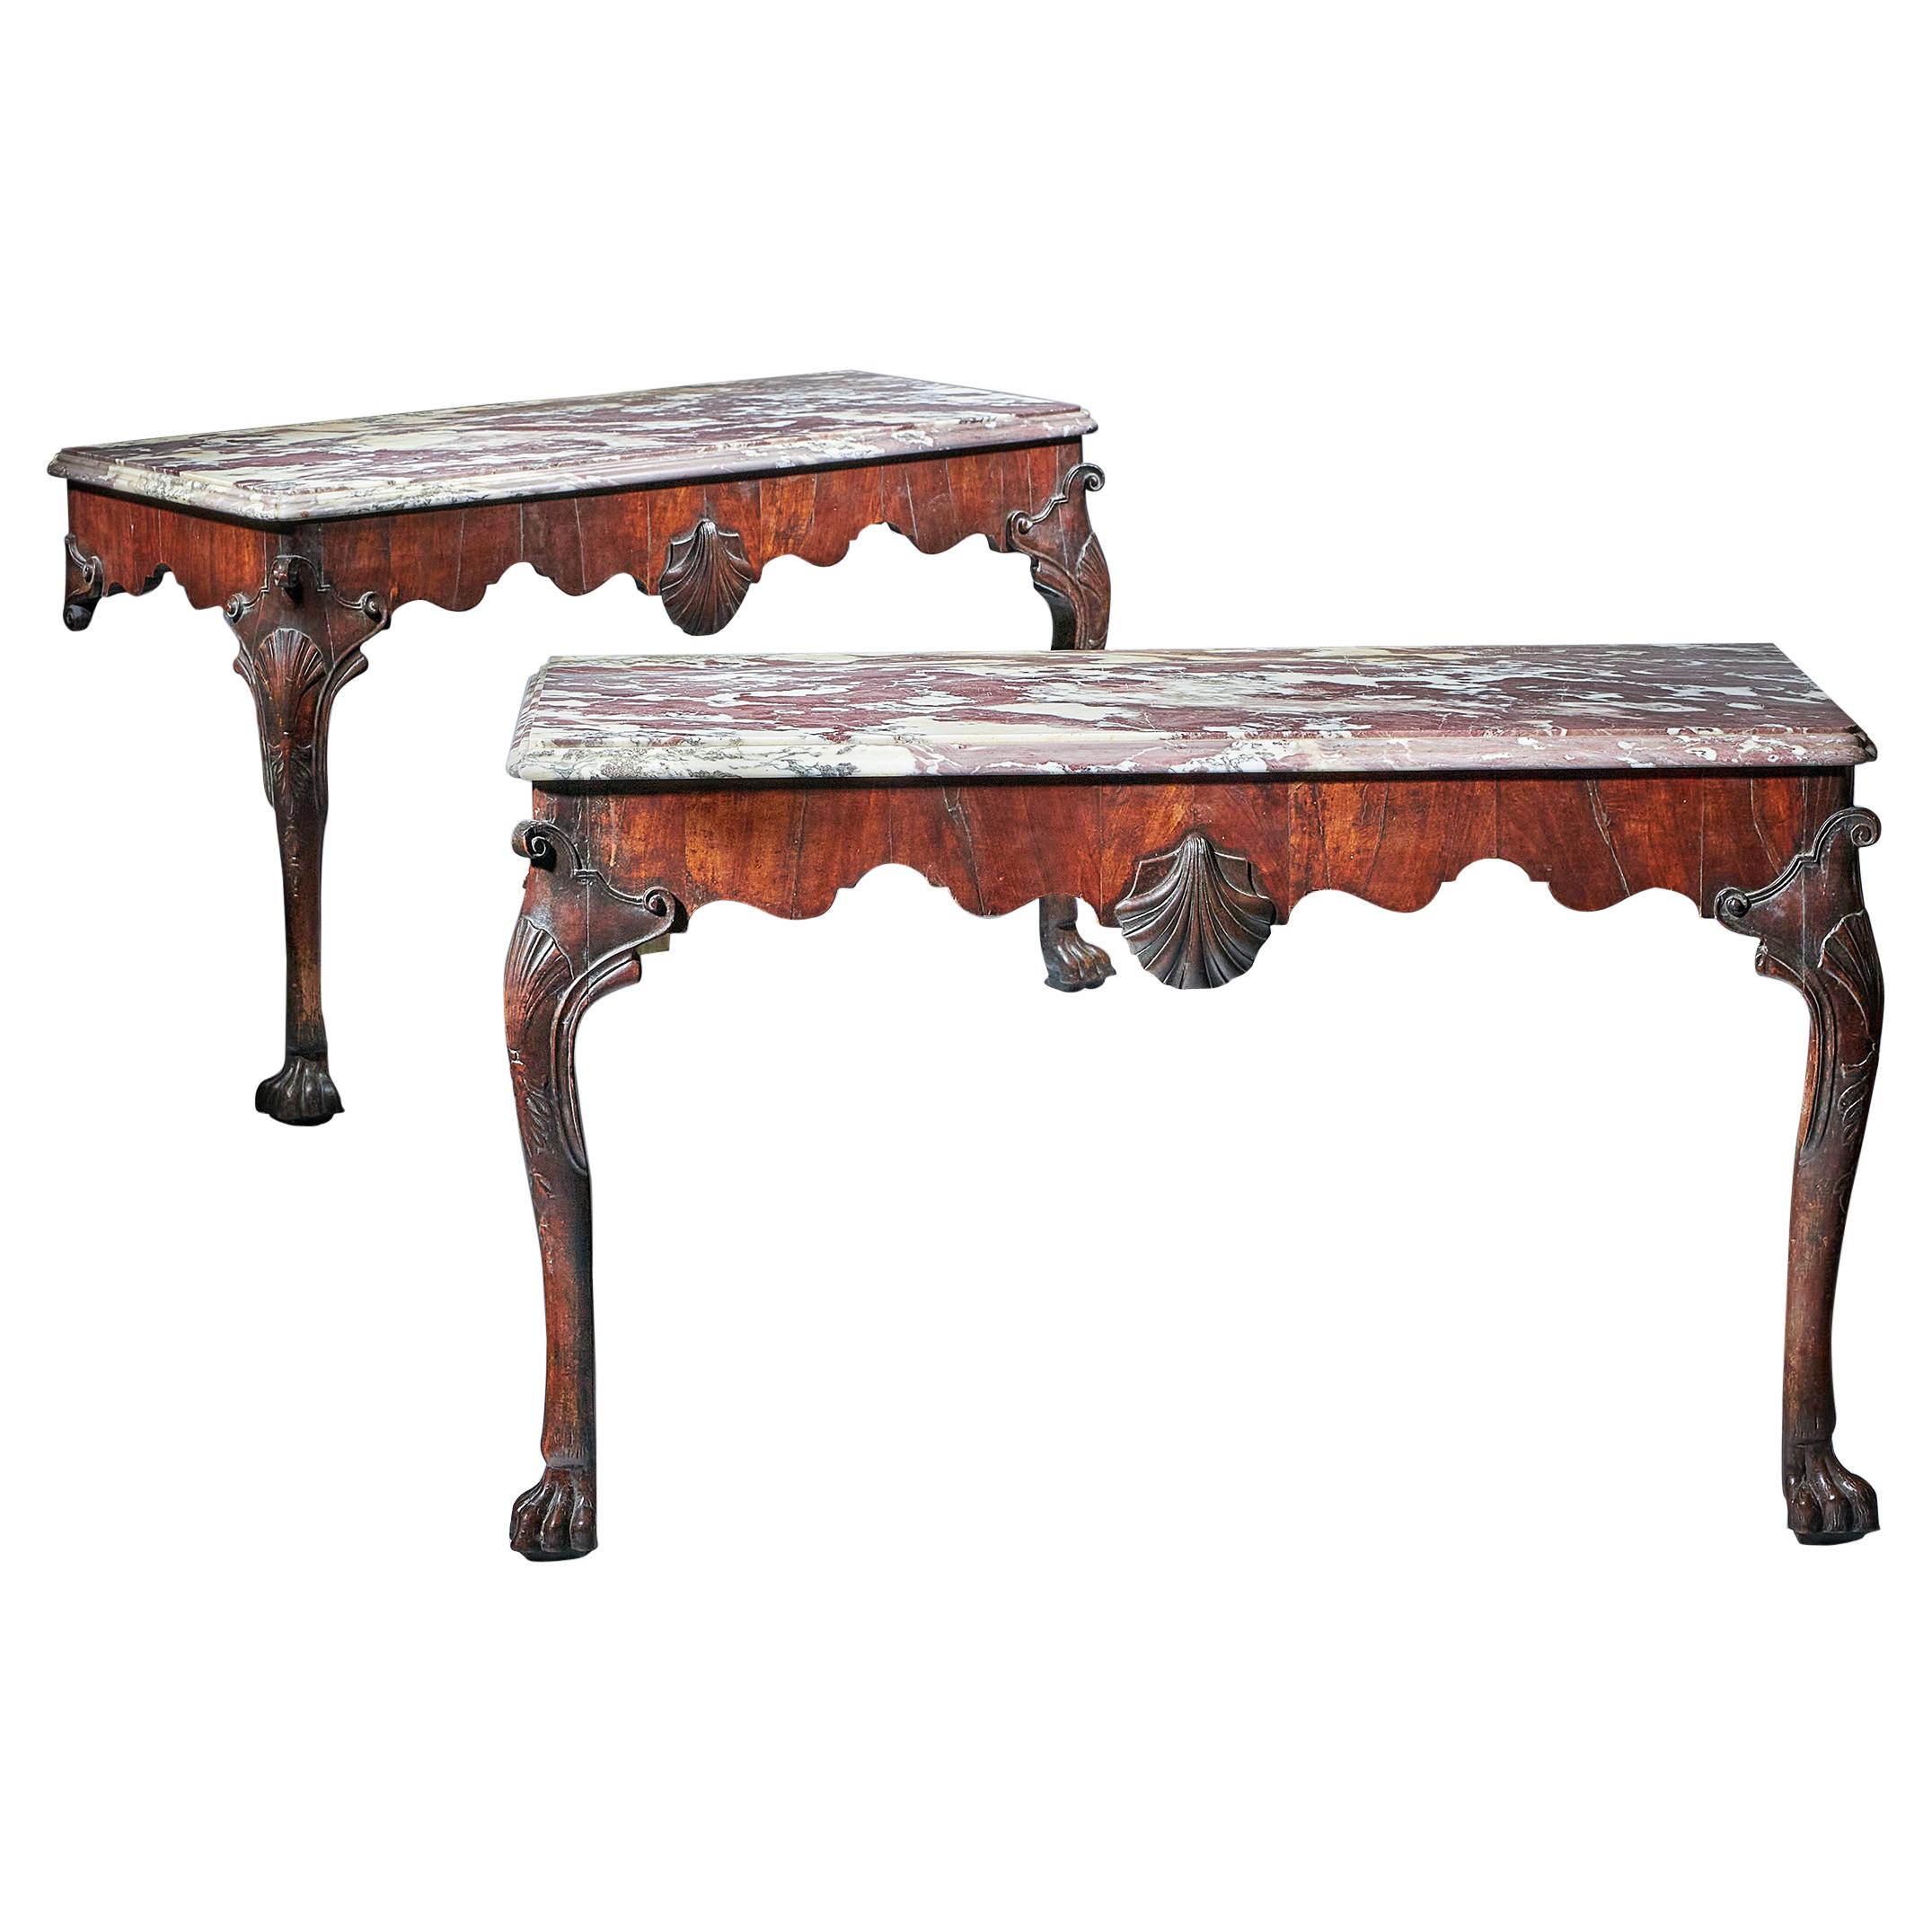 Important Pair of George II Irish Walnut Console Tables, Breccia Violat Marble For Sale